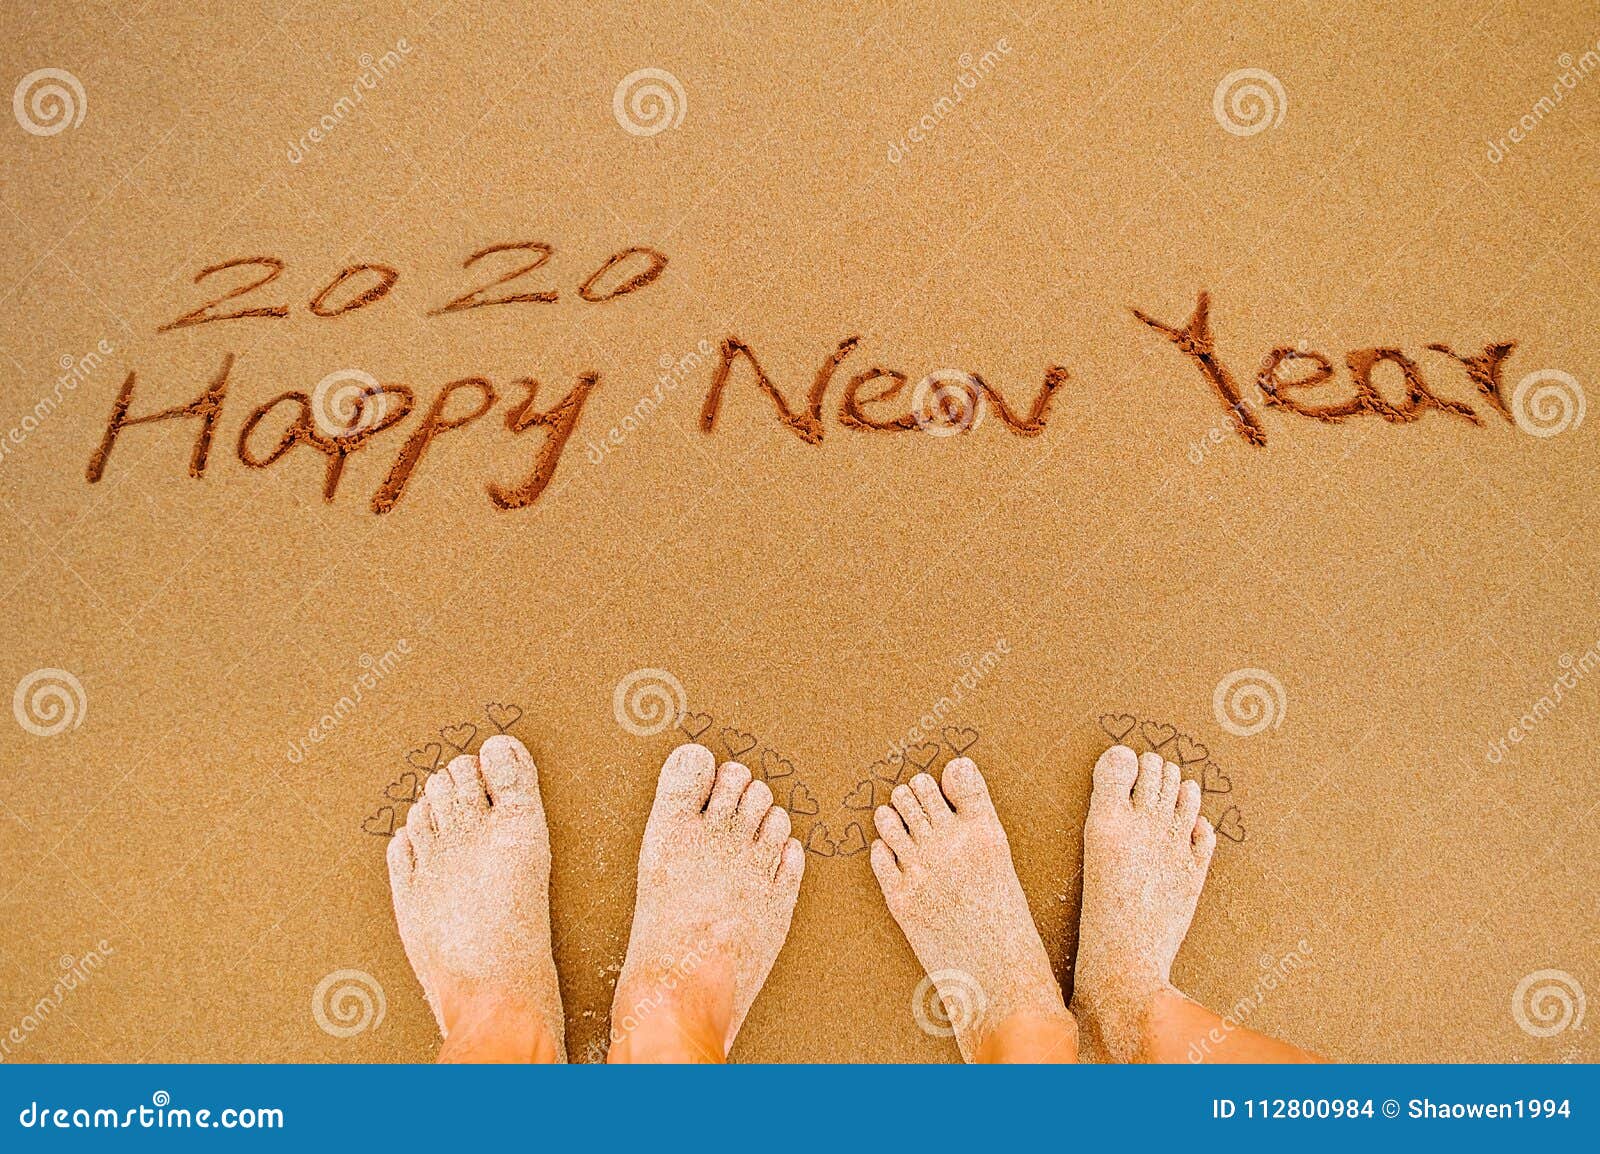 2020 Happy New Year and Love Heart Stock Photo - Image of fiesta ...